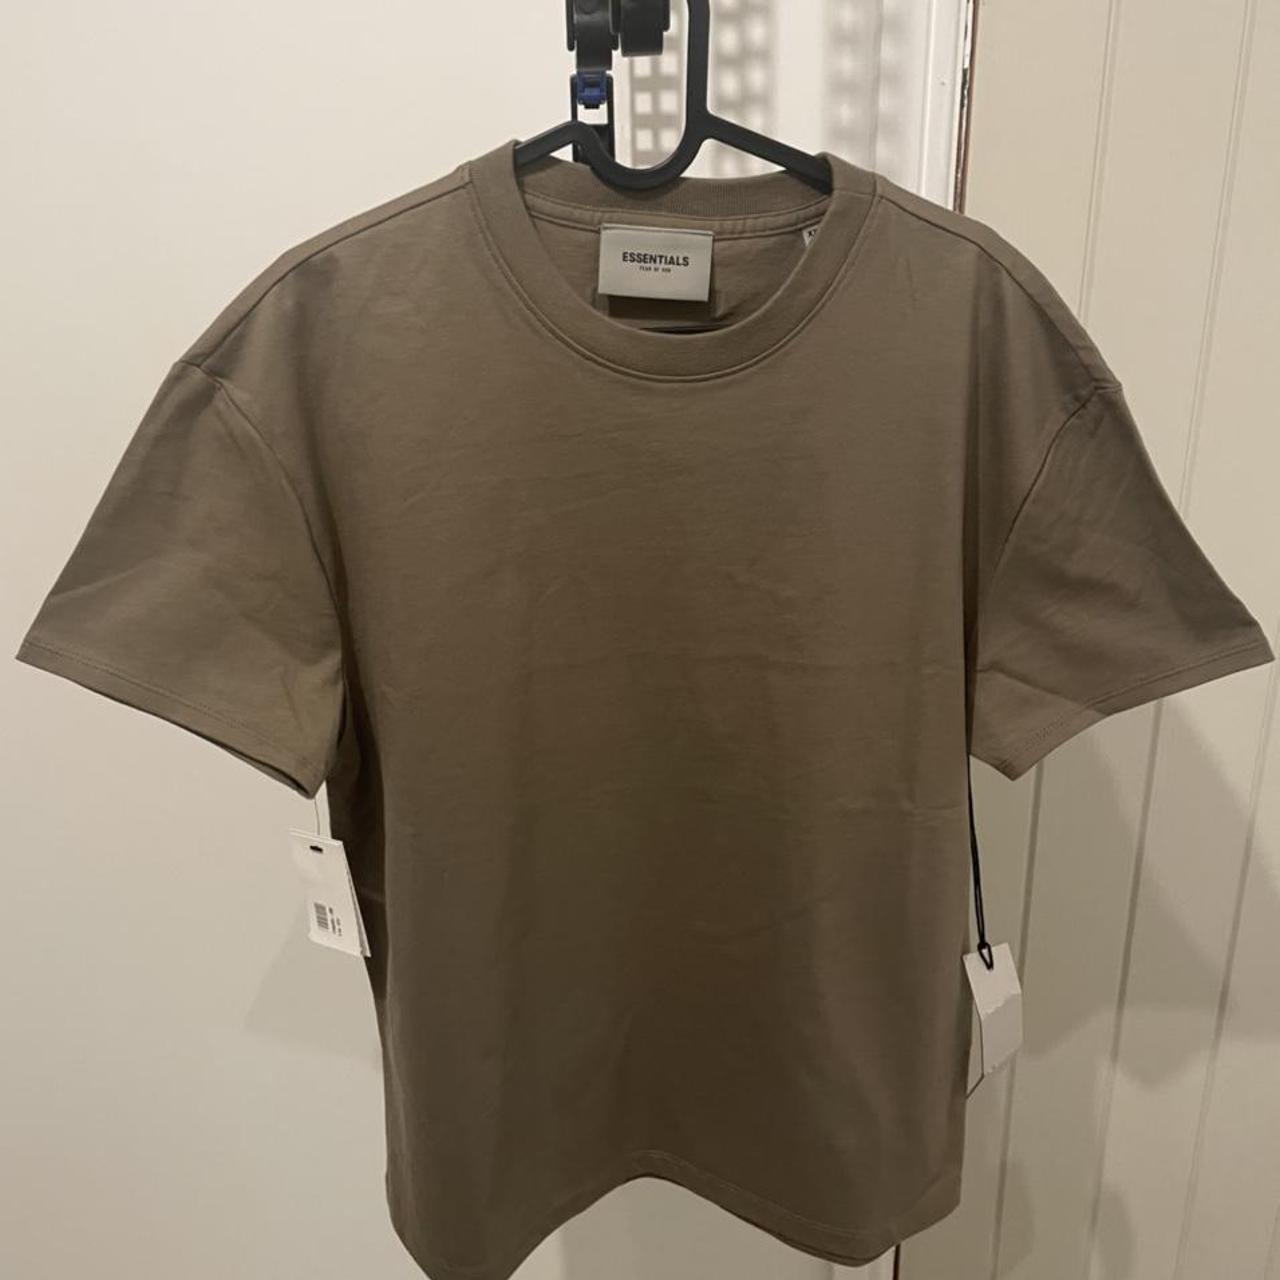 Product Image 1 - FEAR OF GOD ESSENTIALS TEE
Logo-Print